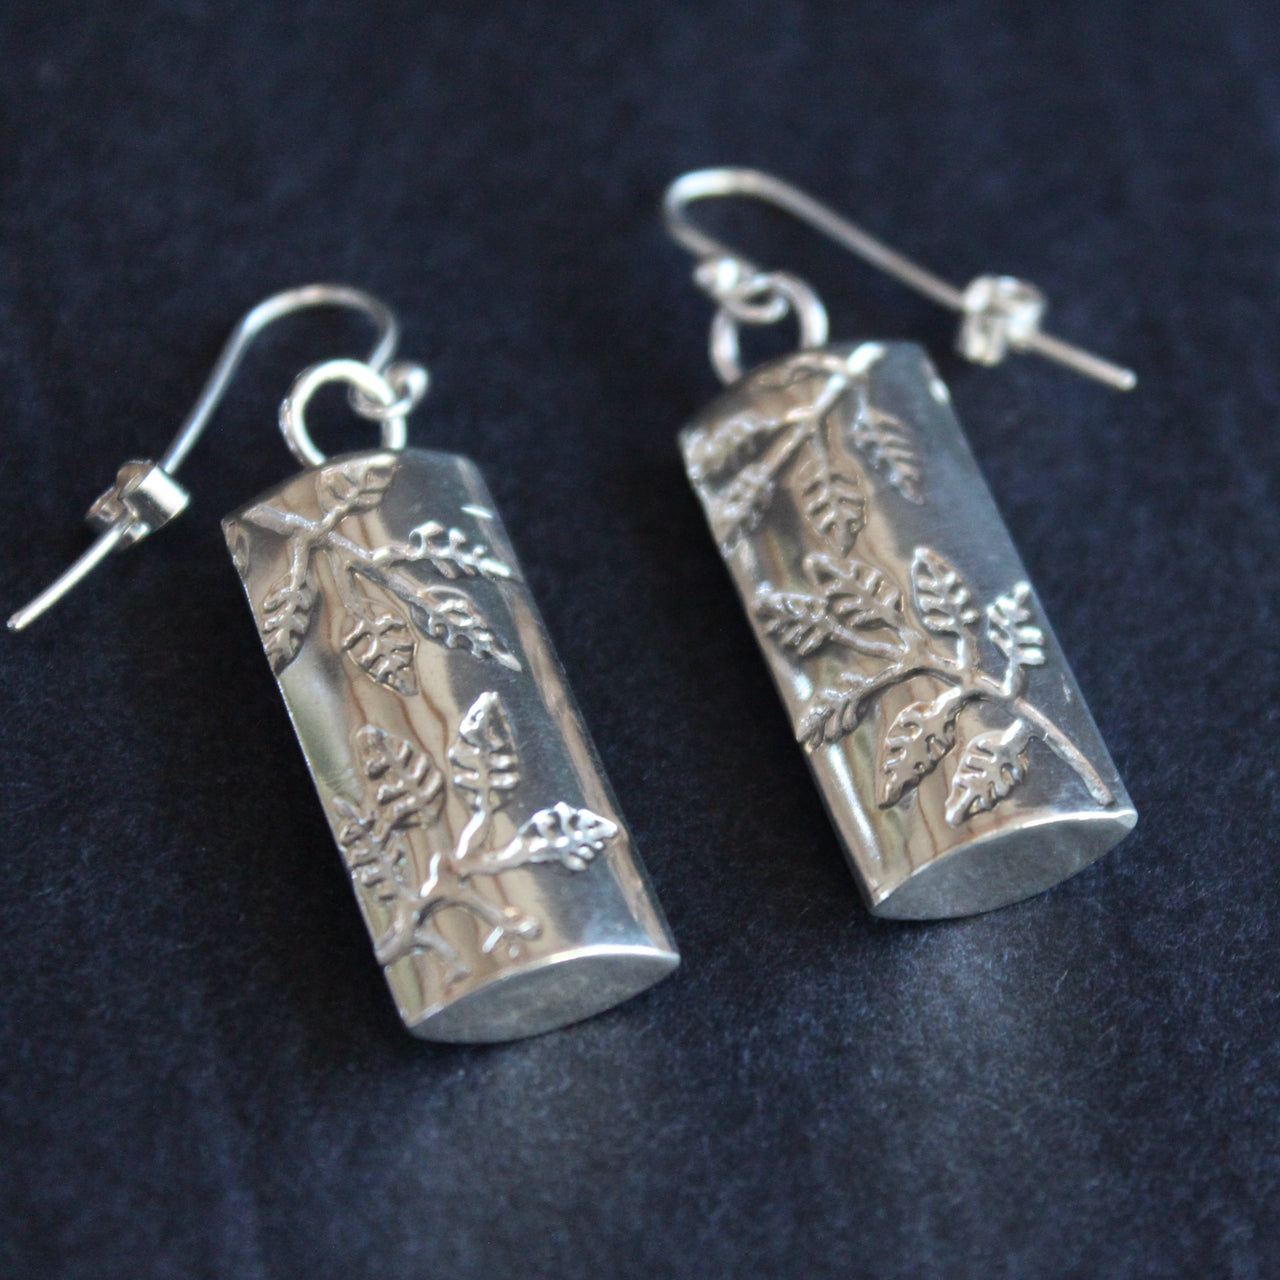 Plantae earrings with embossed ash leaves in silver by Beverly Bartlett